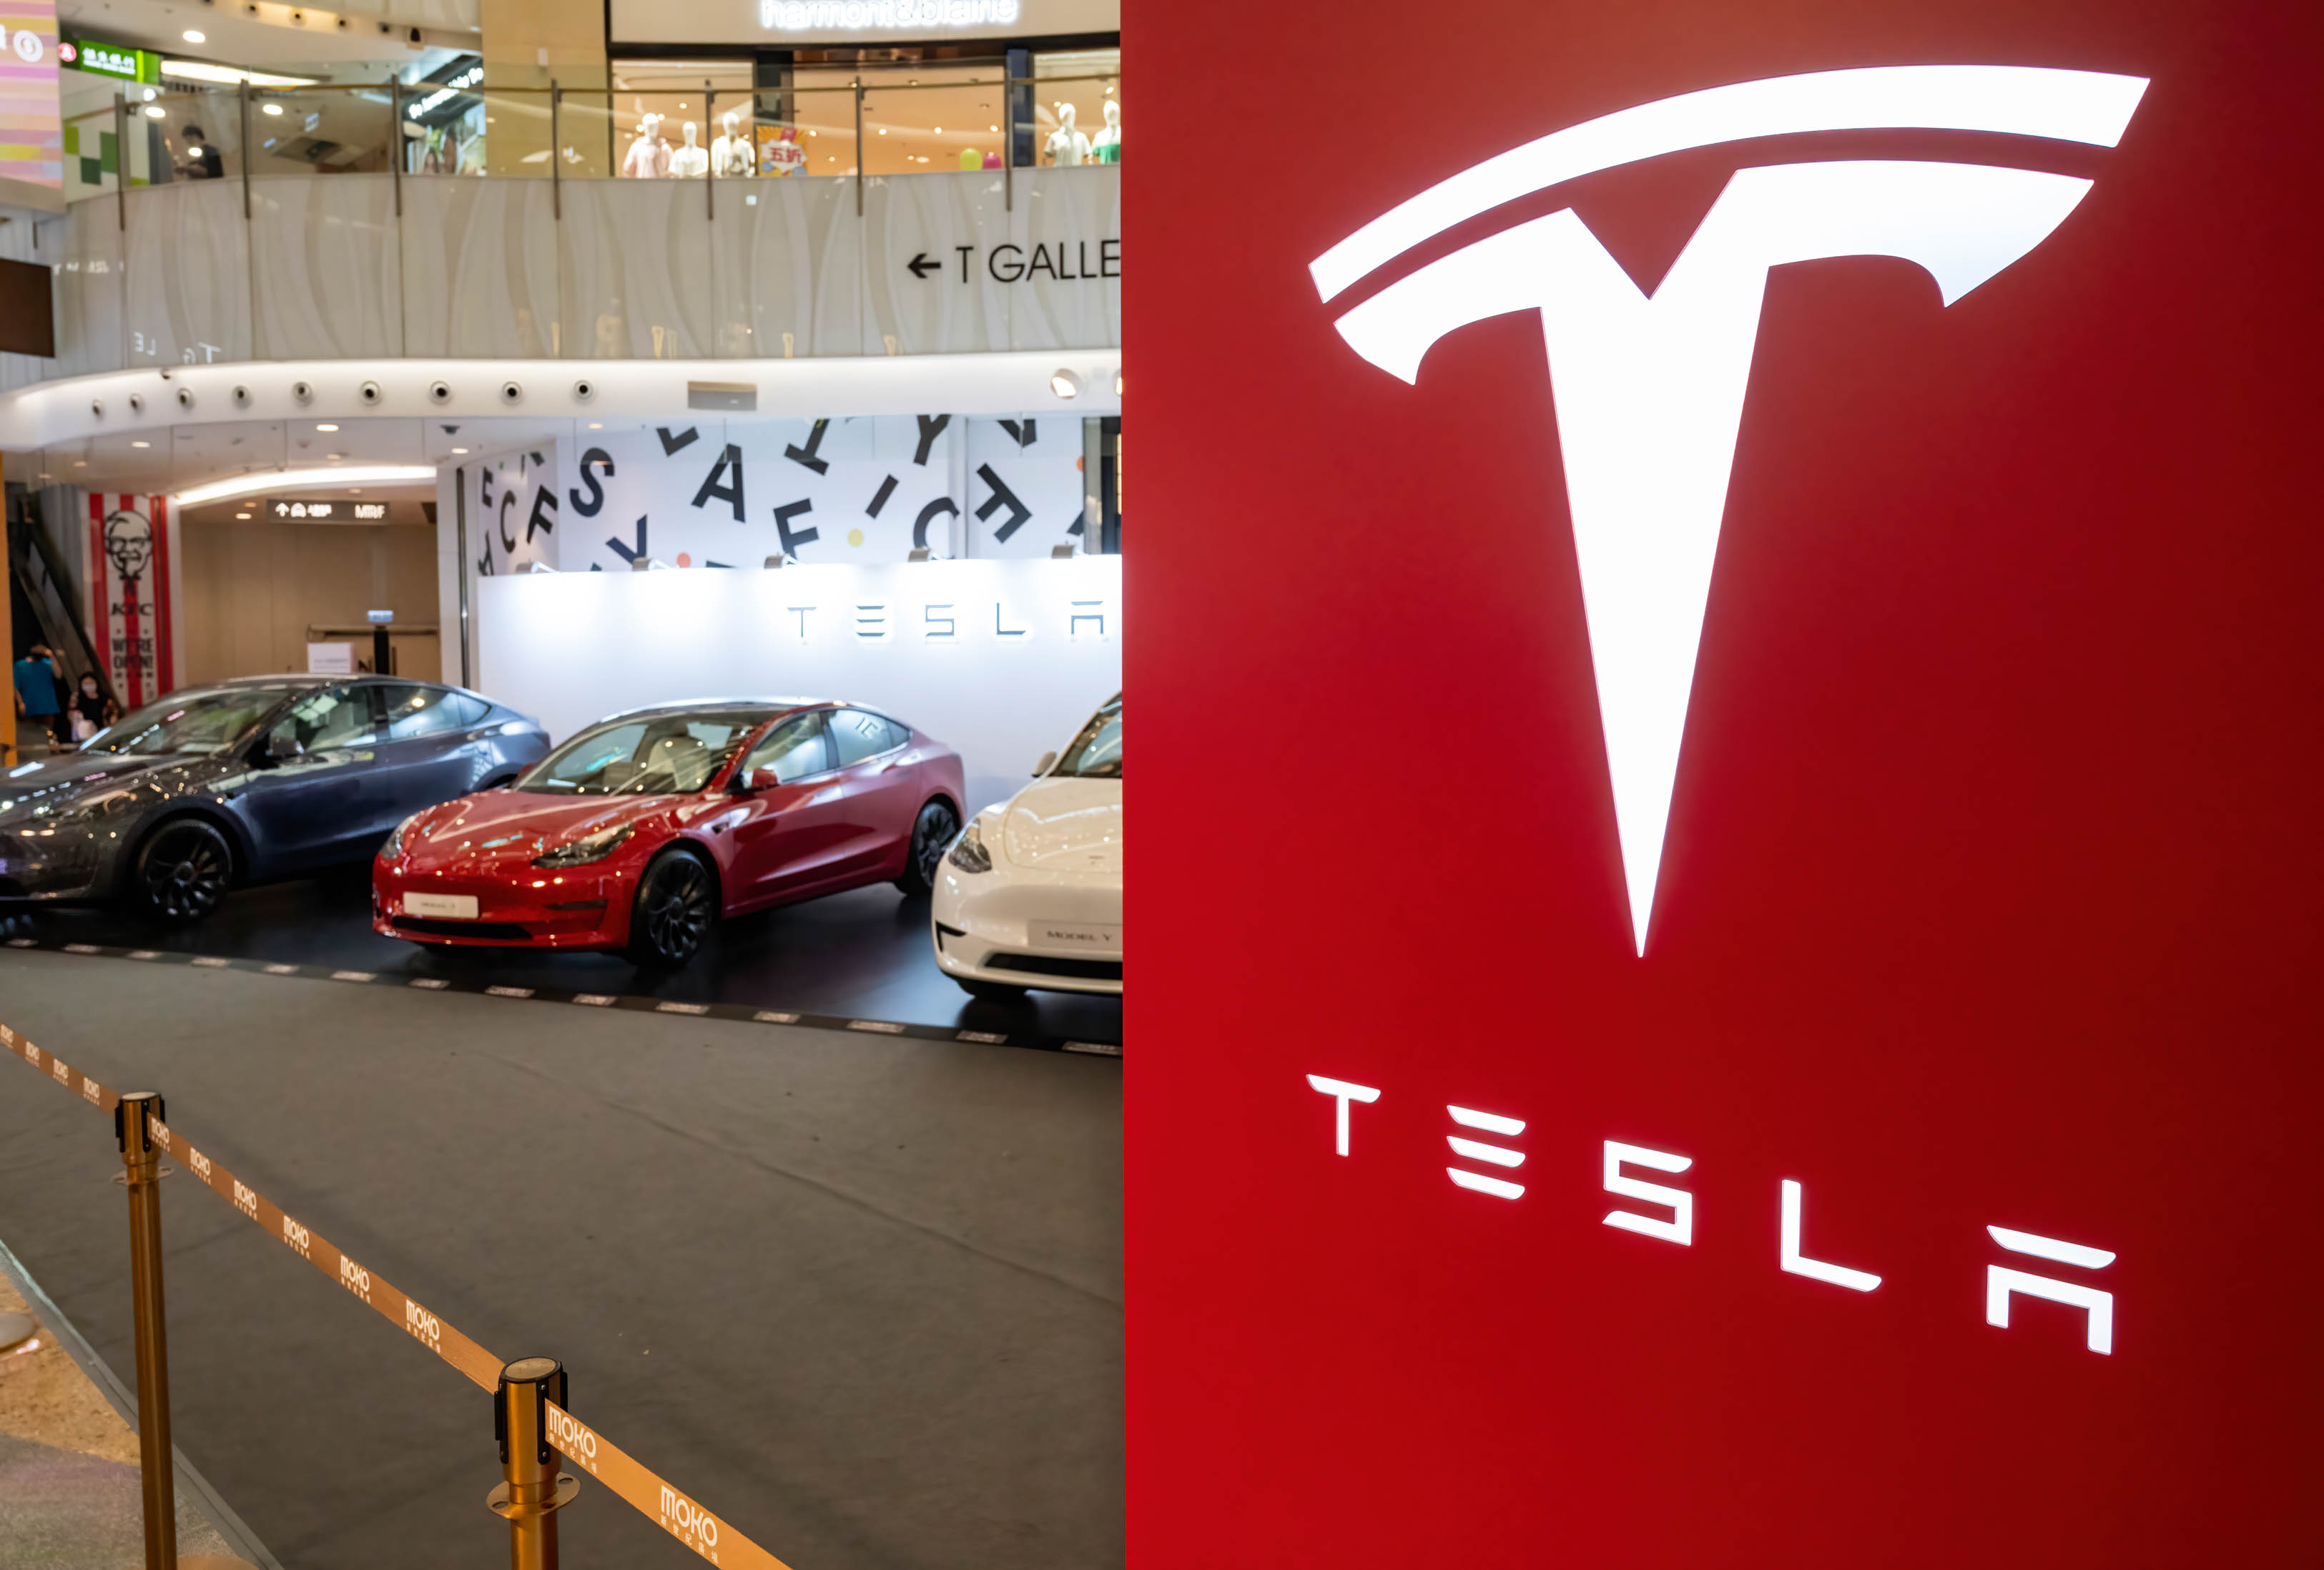 The Morning After: Tesla recalls 40,000 cars with broken
power steering